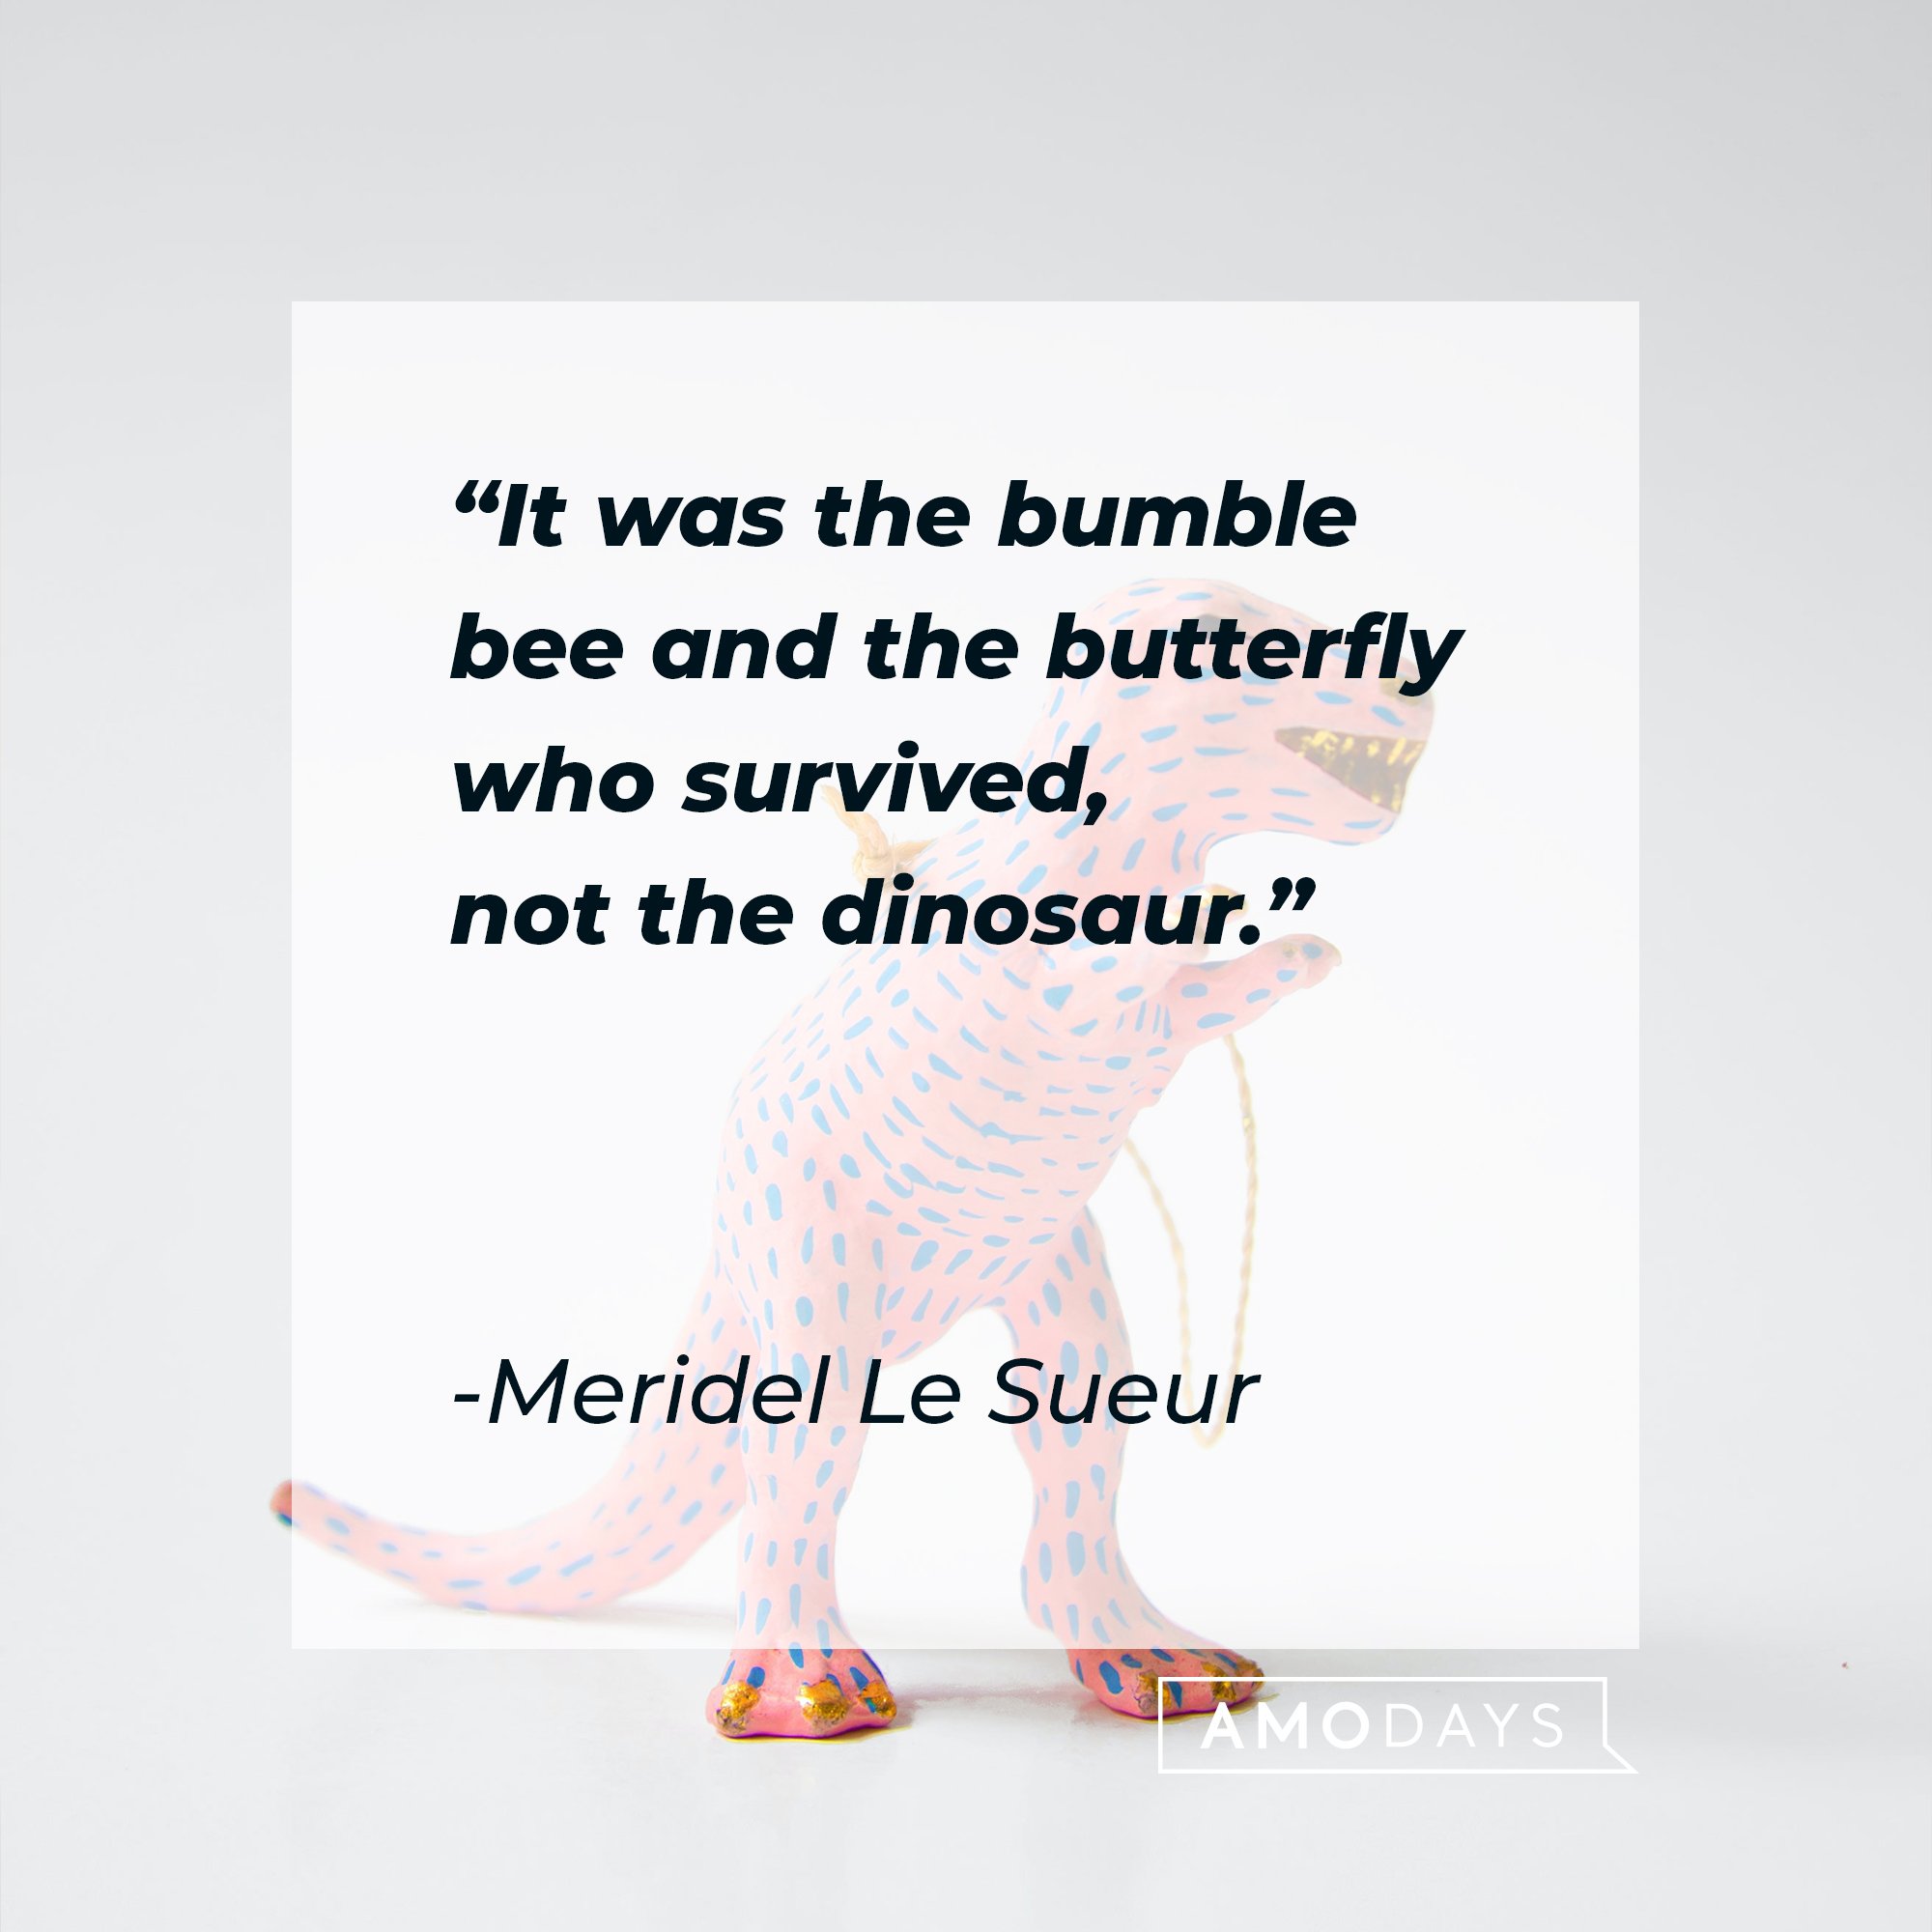 Meridel Le Sueur’s quote: "It was the bumble bee and the butterfly who survived, not the dinosaur." | Image: AmoDays